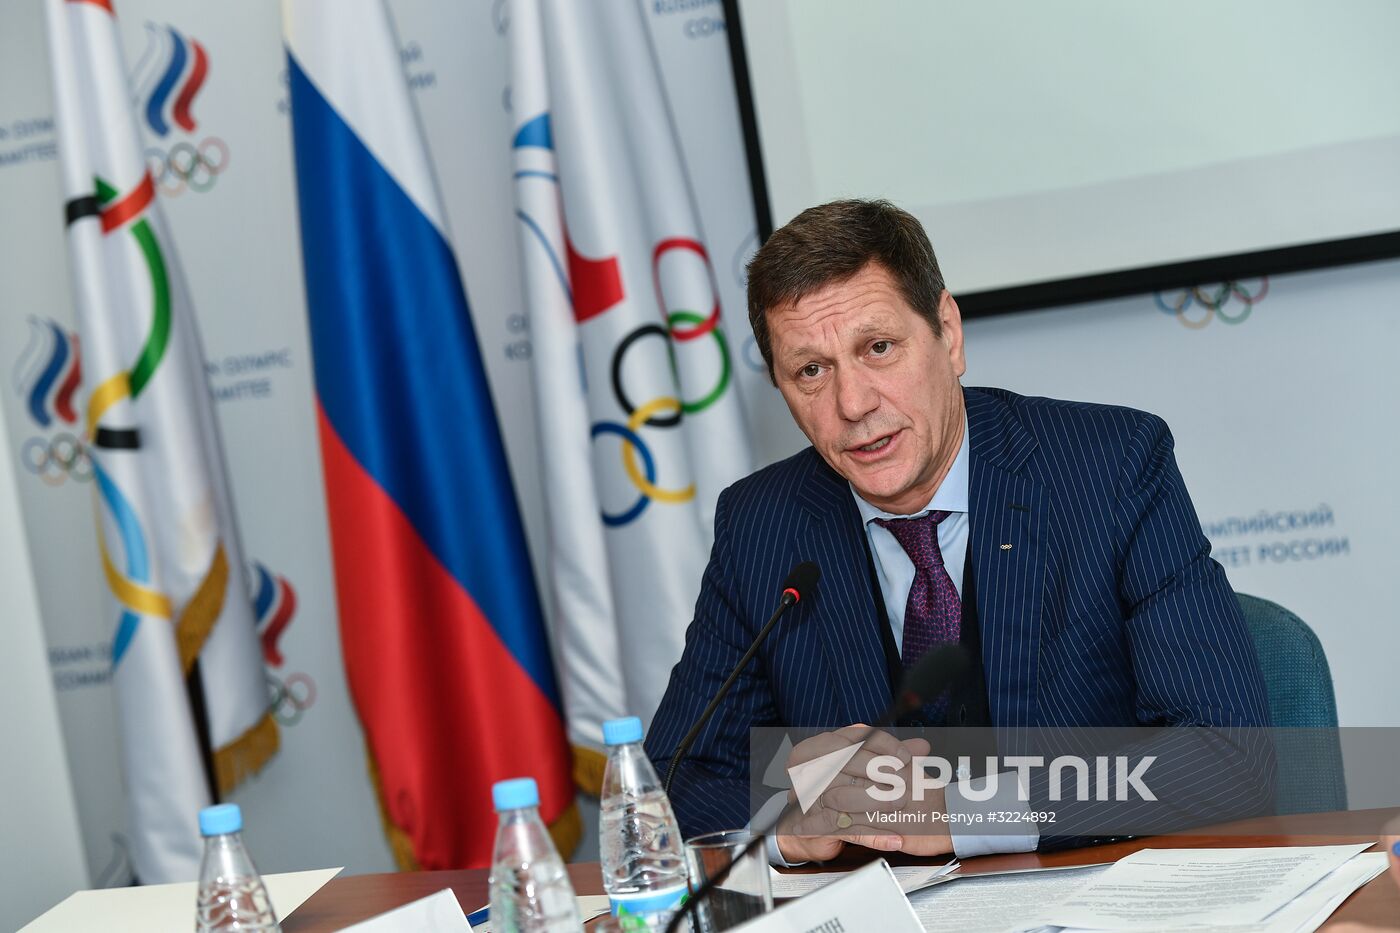 Meeting of the Russian Olympic Committee's executive committee